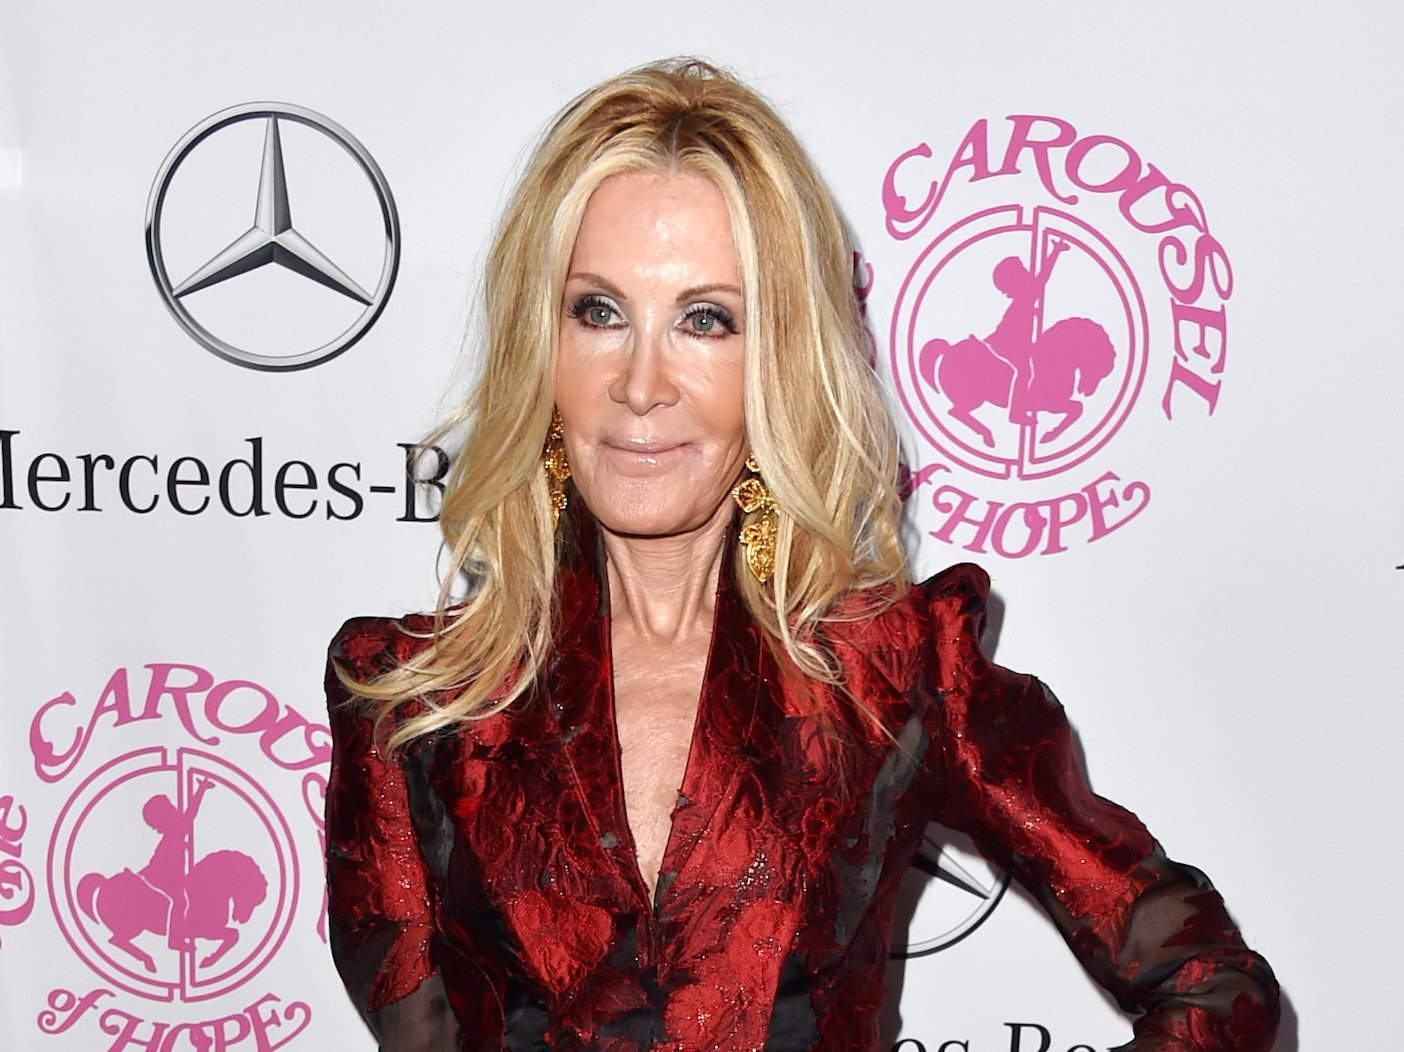 Sketchy Doctor Claims Joan Van Ark Supposedly ‘Scary Skinny’ And Battling ‘Life-Threatening Illness’